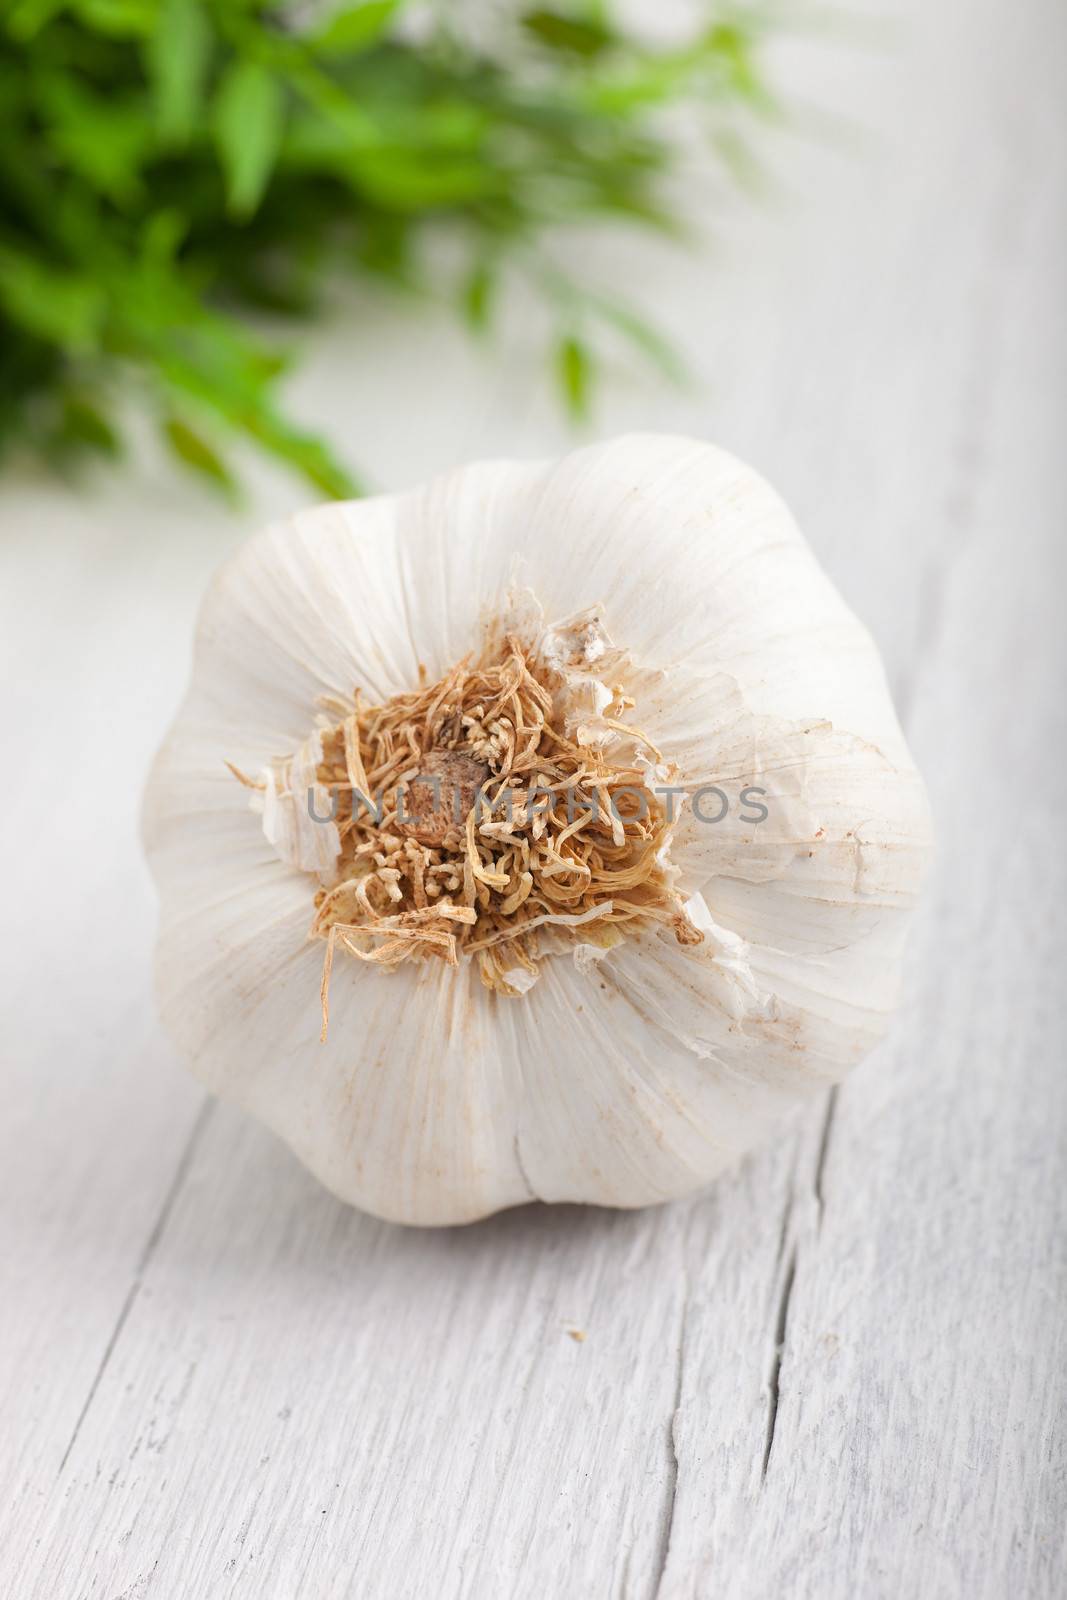 Fresh whole garlic bulb used as a pungent flavouring in cooking, with a view to the bottom of the bulb as it lies on a rustic white painted wooden surface